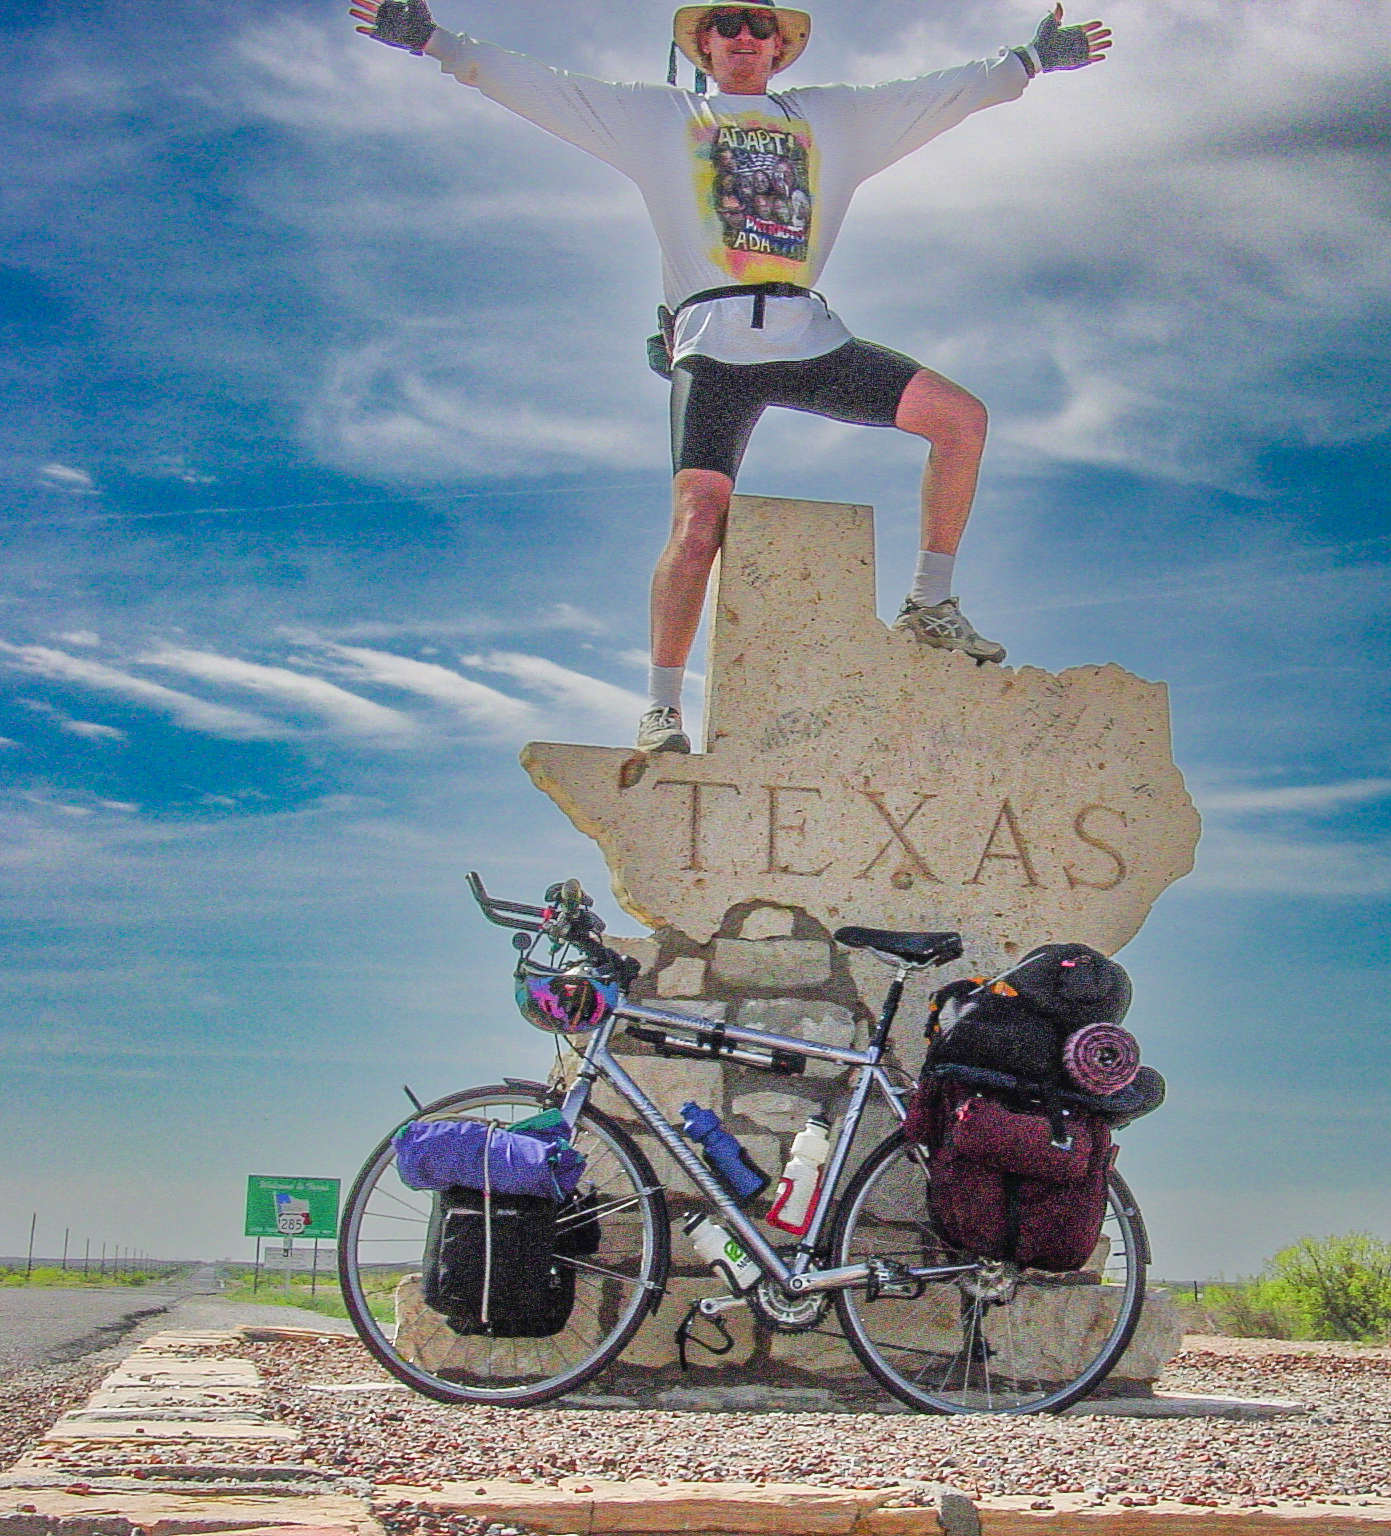 Man stands atop the Texas state line marker in the shape of the state, bicycle leans on the sign below. Blue sky with clouds in open country. The top of the man's hat is not visible.